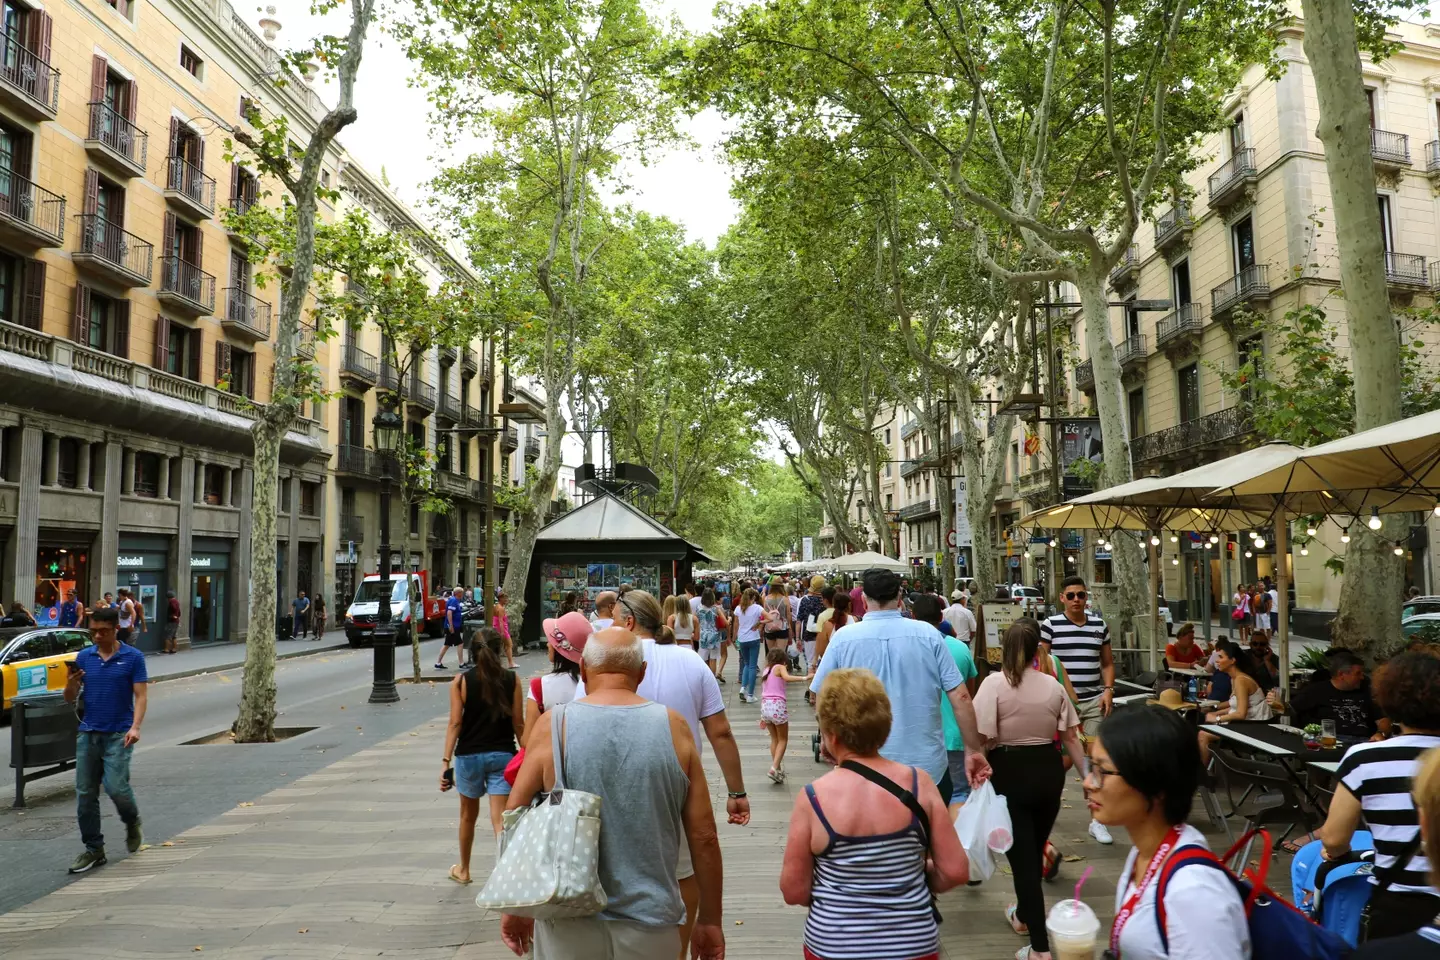 Barcelona is notorious for thieves stealing from tourists.